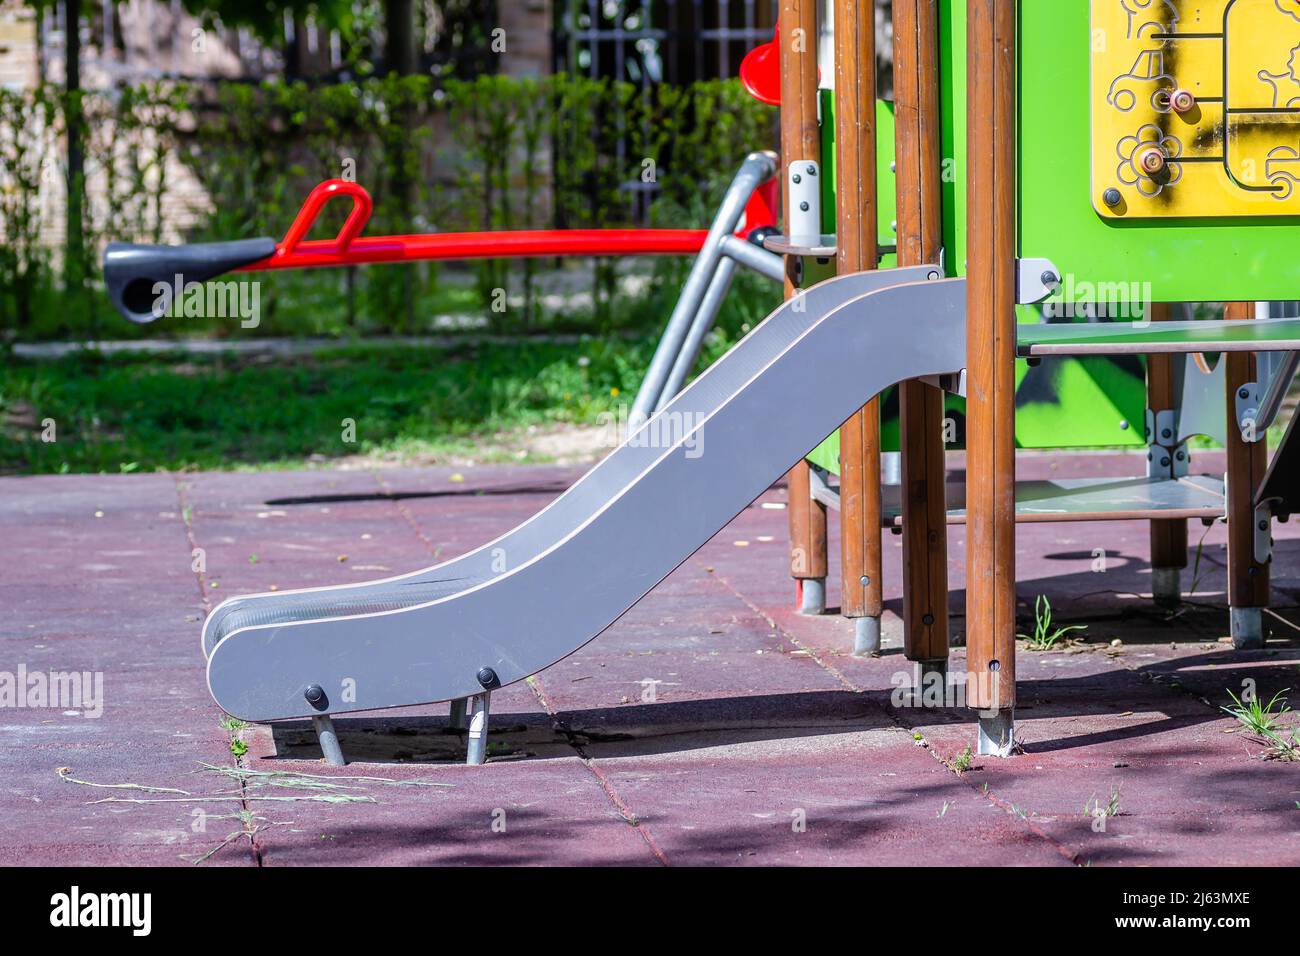 Colorful playground equipment with a variety of toys, including a slide and games to play on a sunny, early spring day. Stock Photo